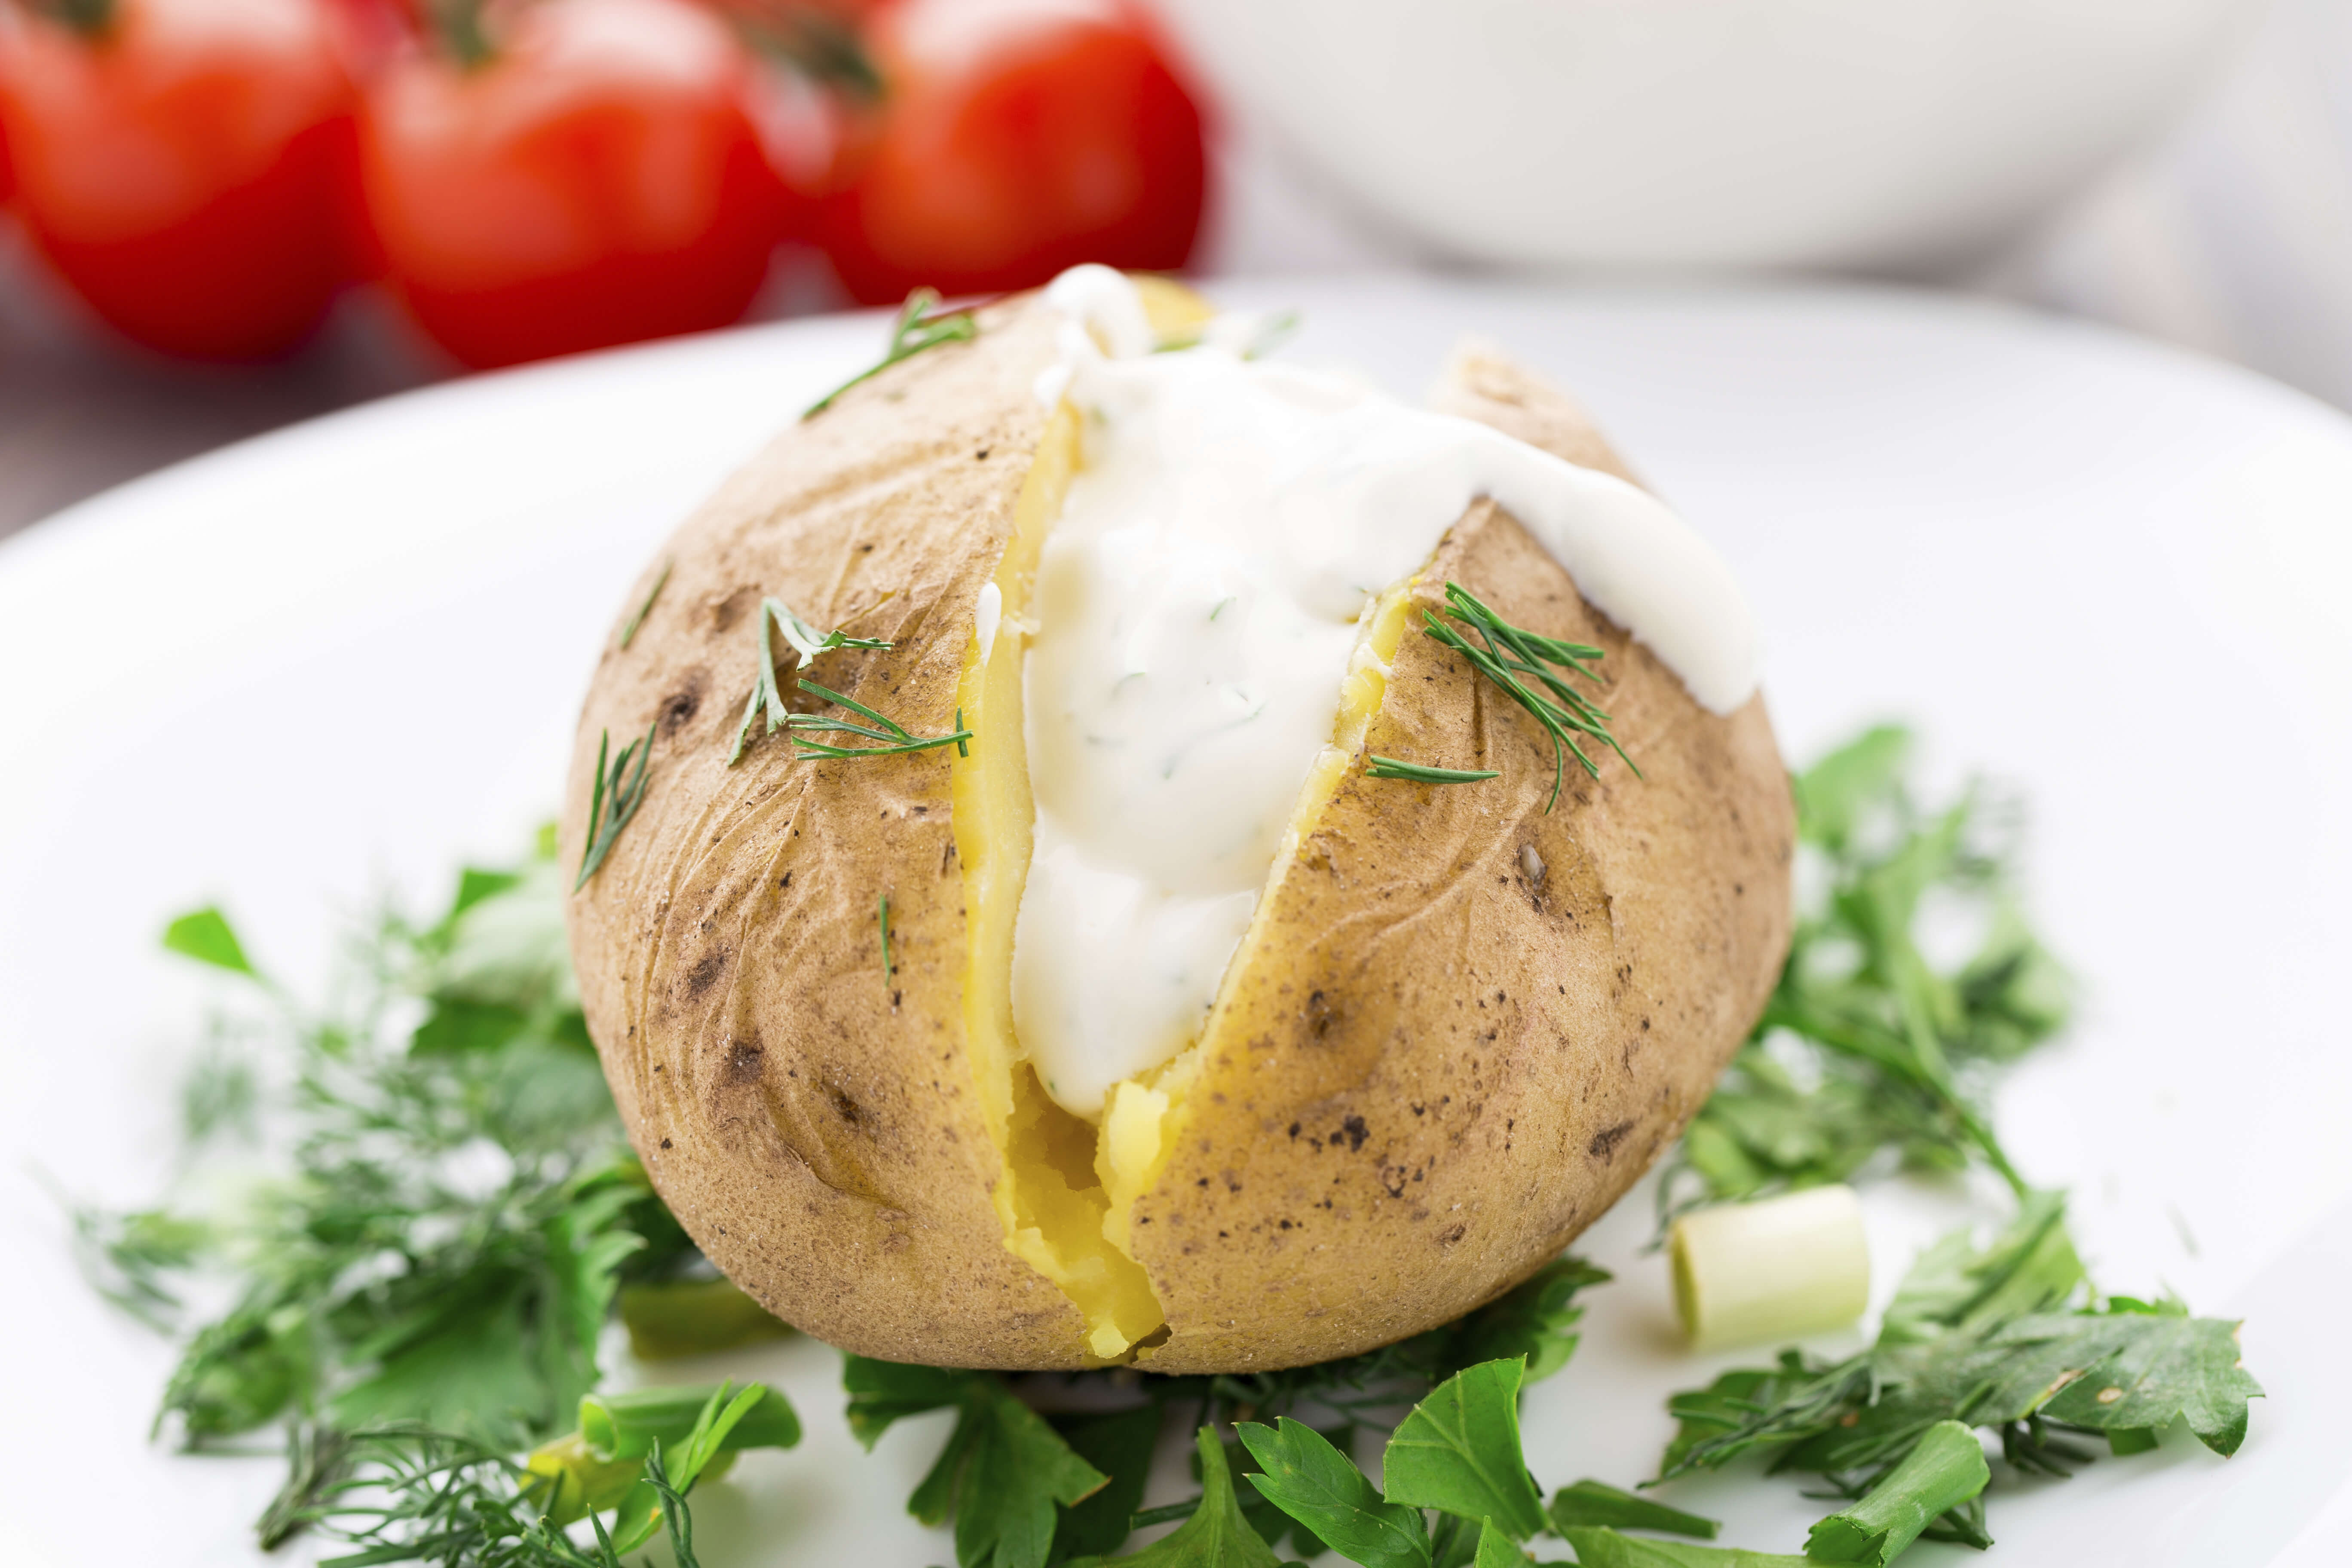 Baked potatoes are a budget-friendly meal that's fun to get creative with.